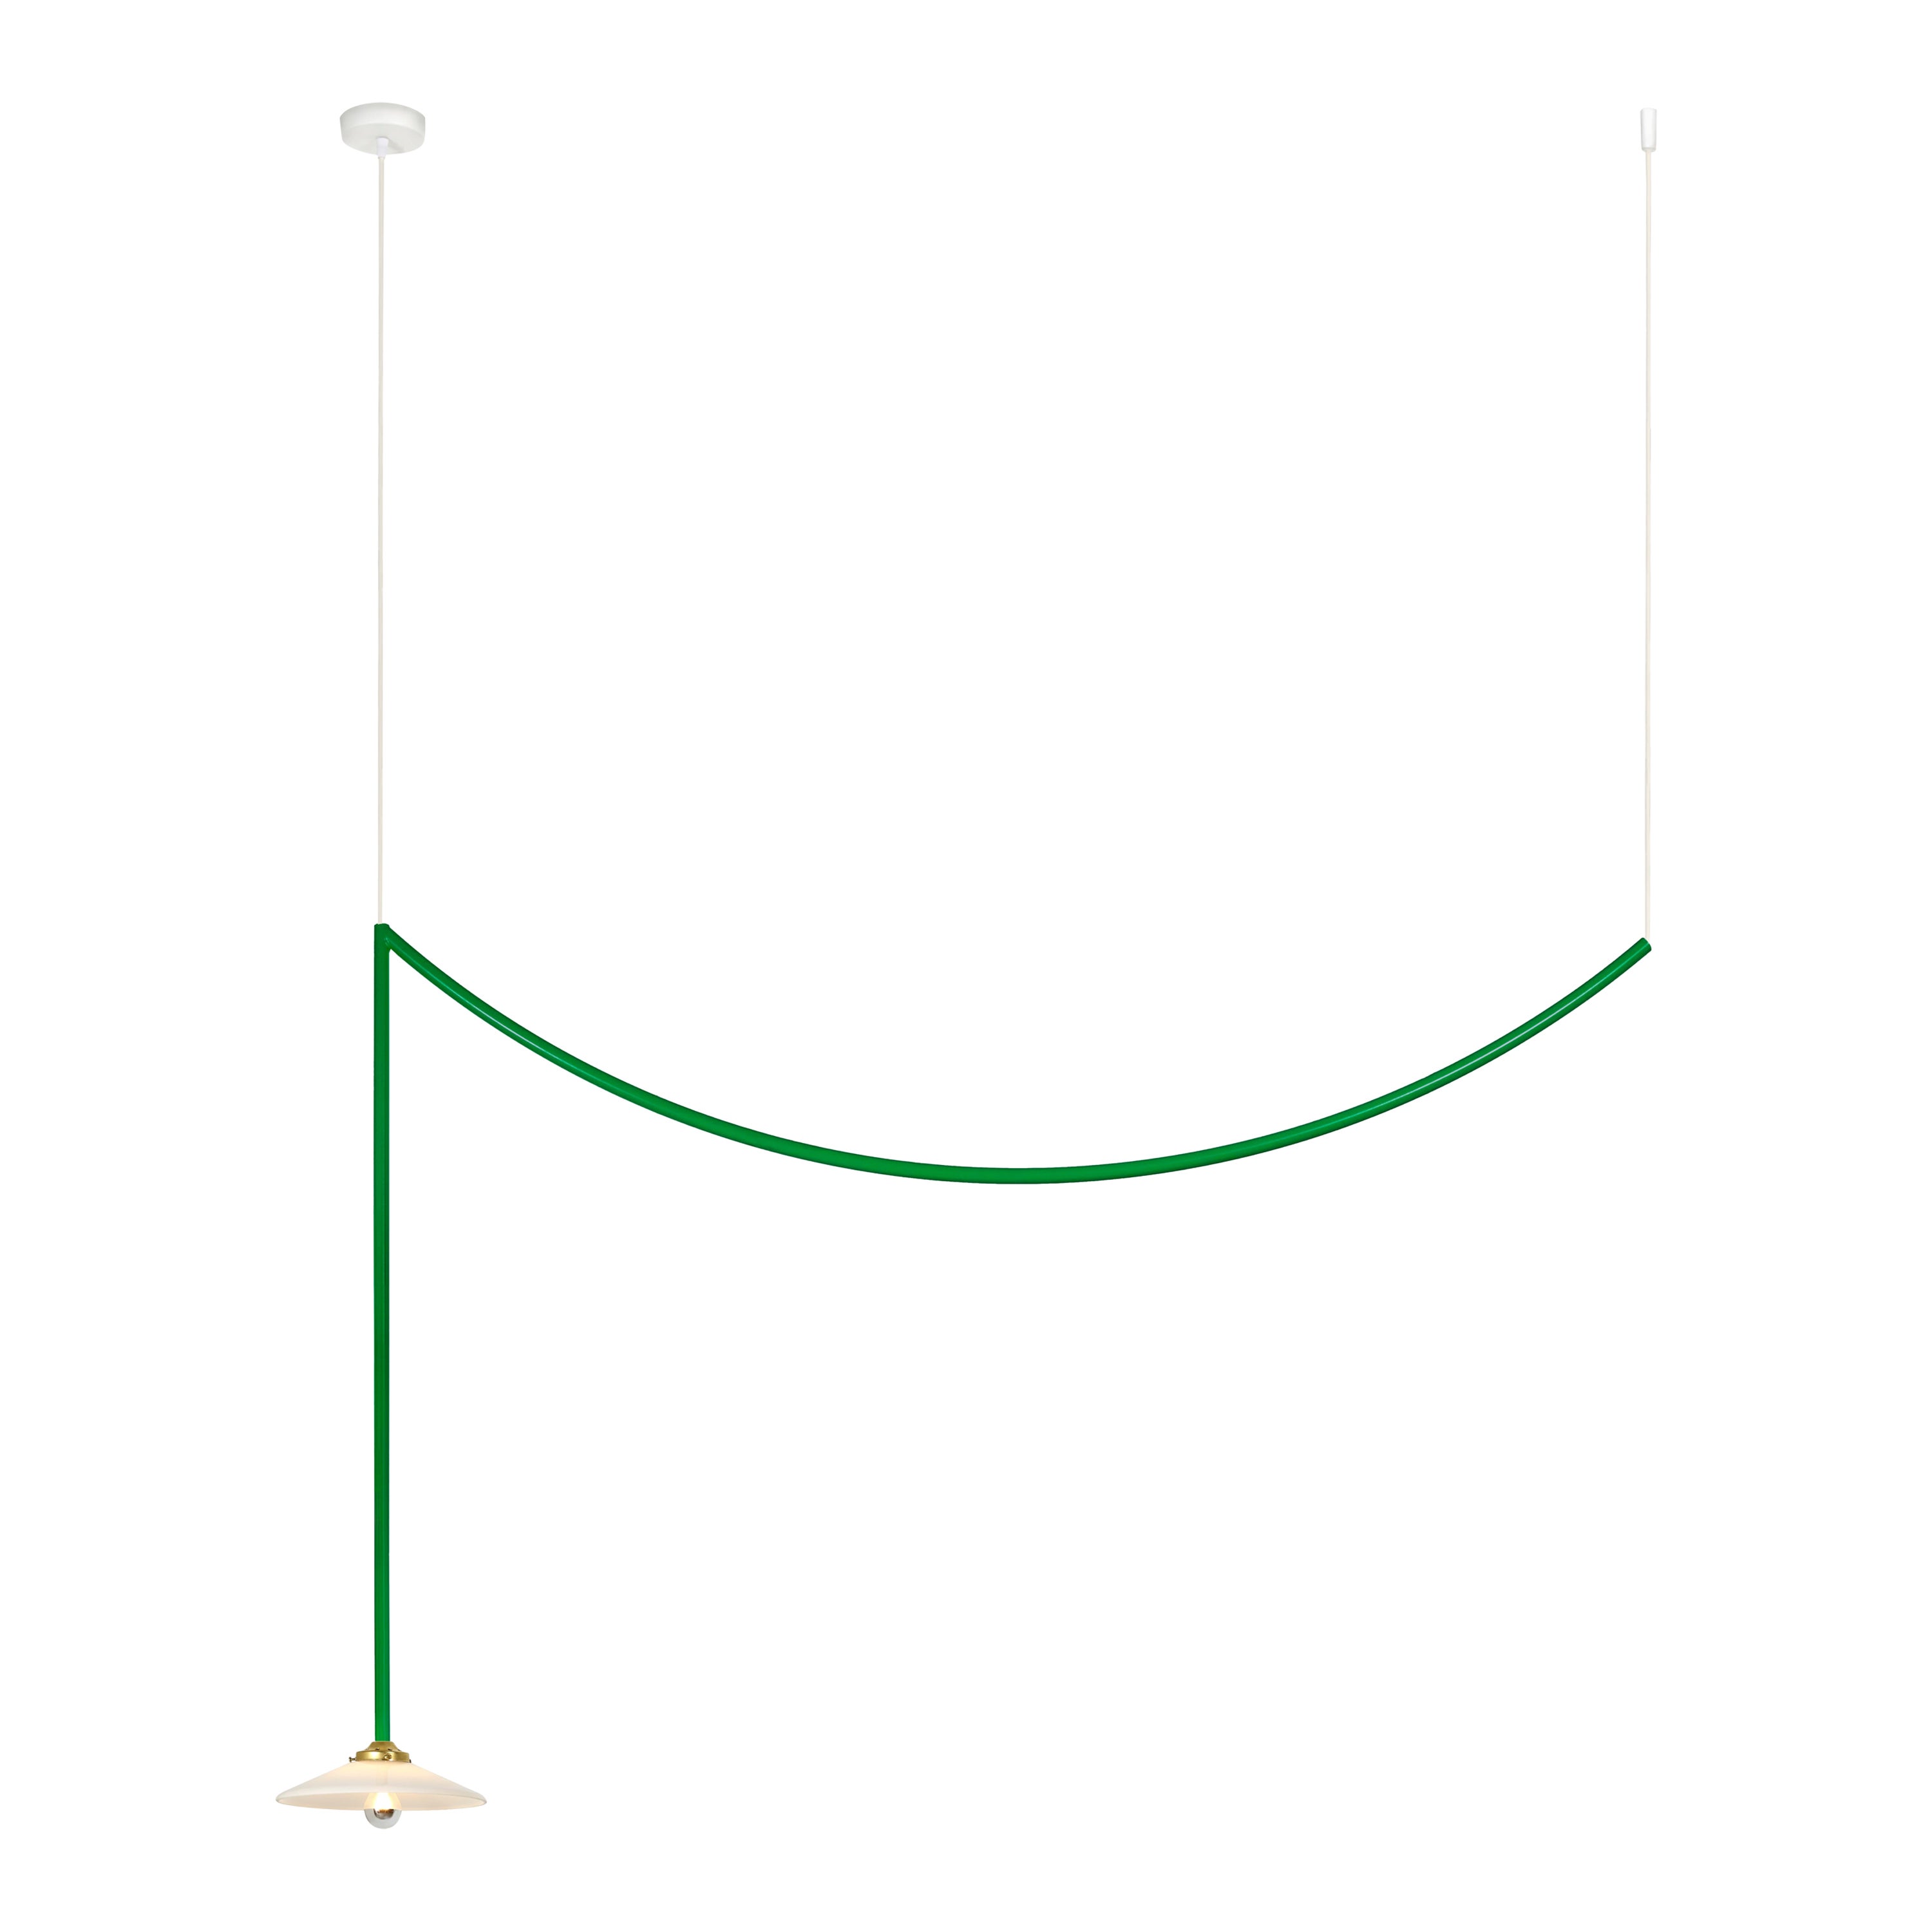 Contemporary Ceiling Lamp N°4 by Muller Van Severen x Valerie Objects, Green For Sale